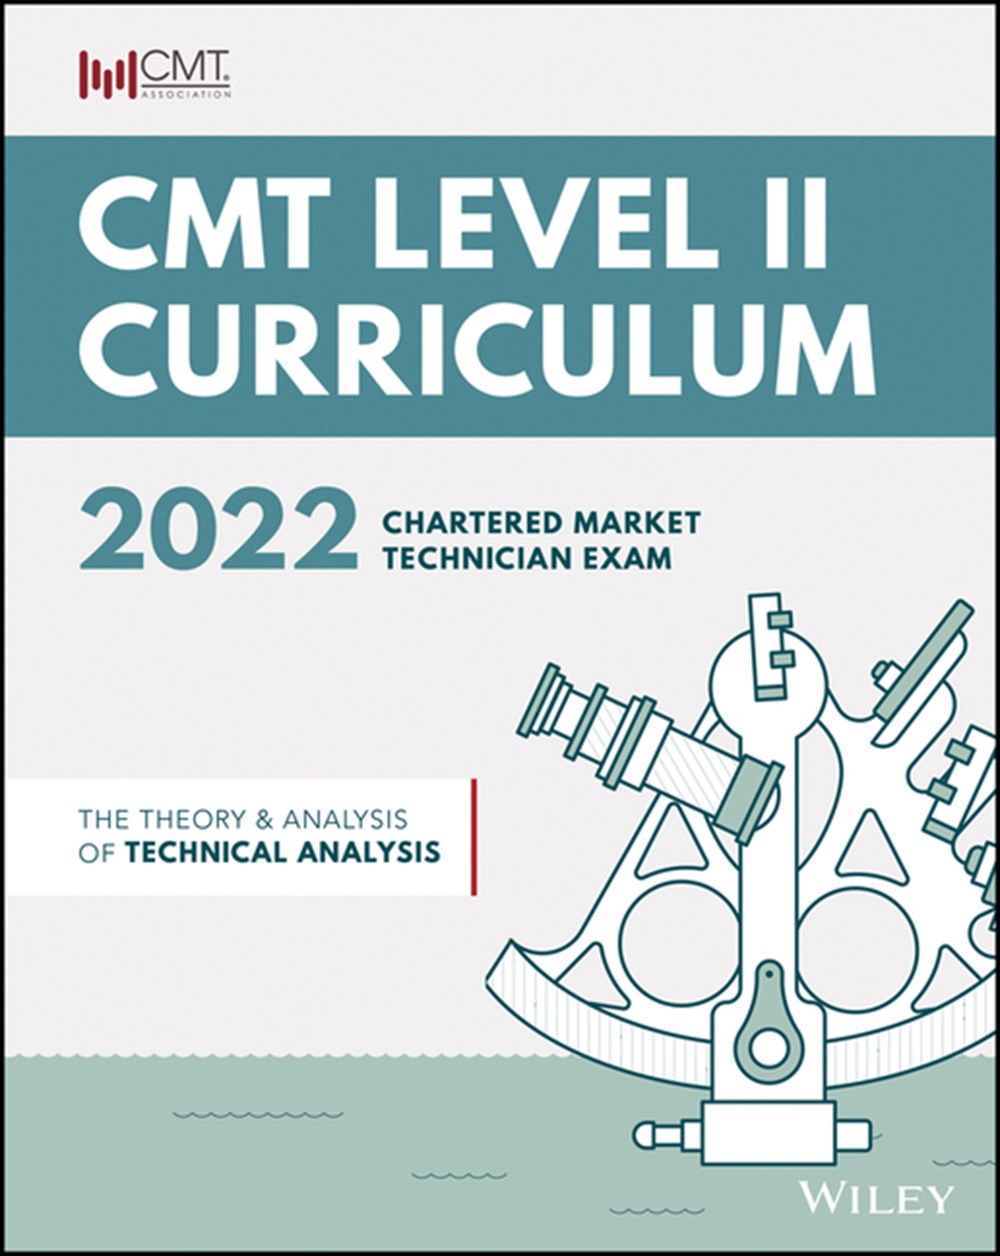 Cmt Curriculum Level II 2022 Theory and Analysis